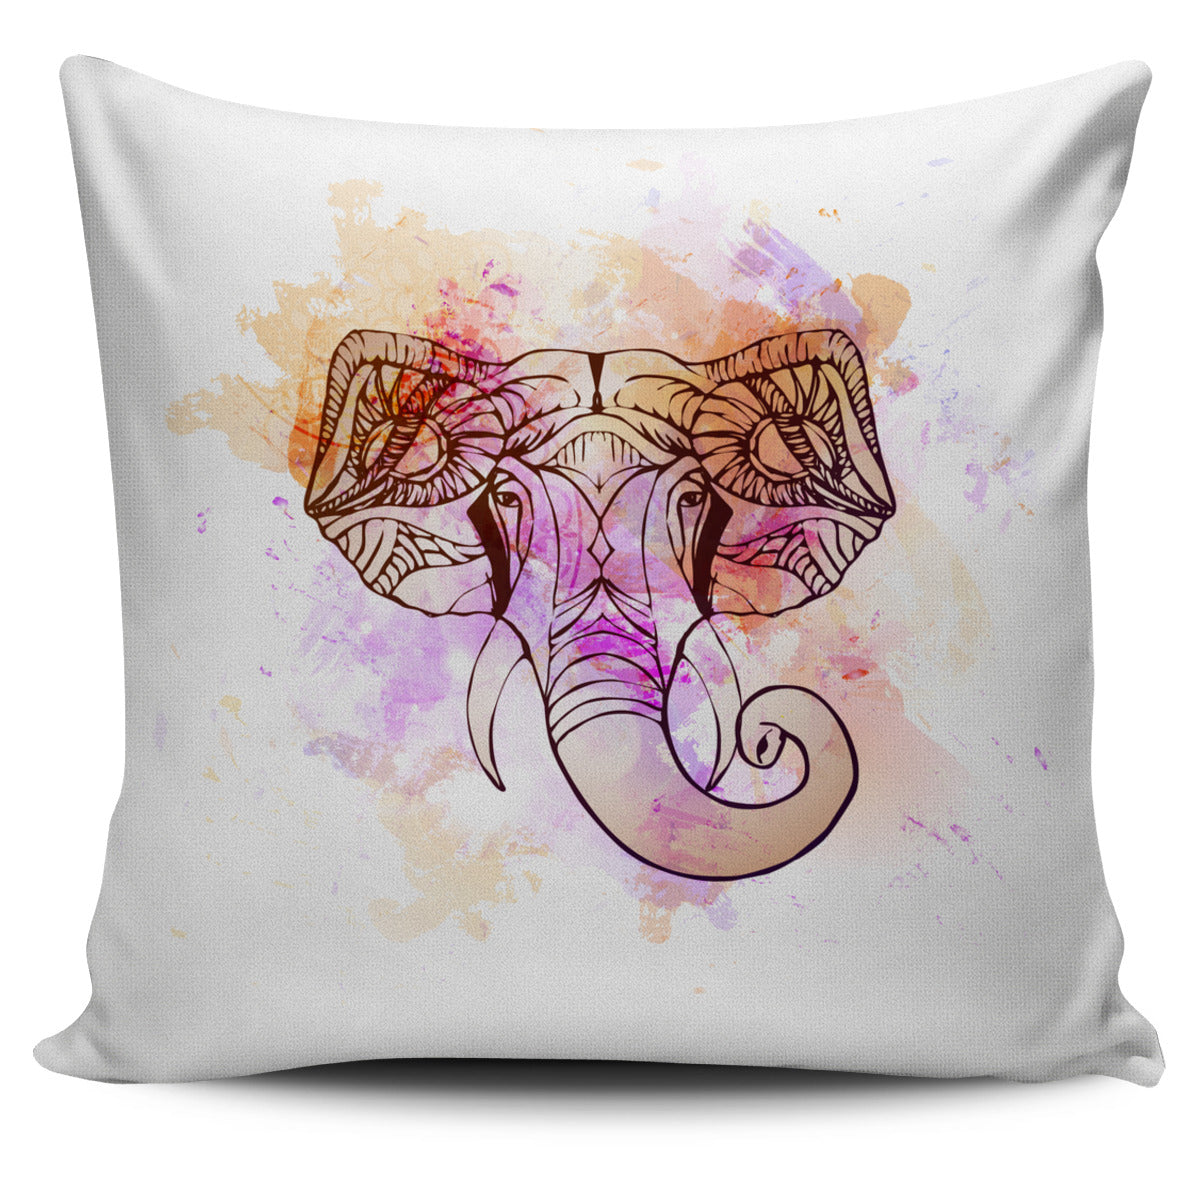 Watercolor Elephant Pillow Cover